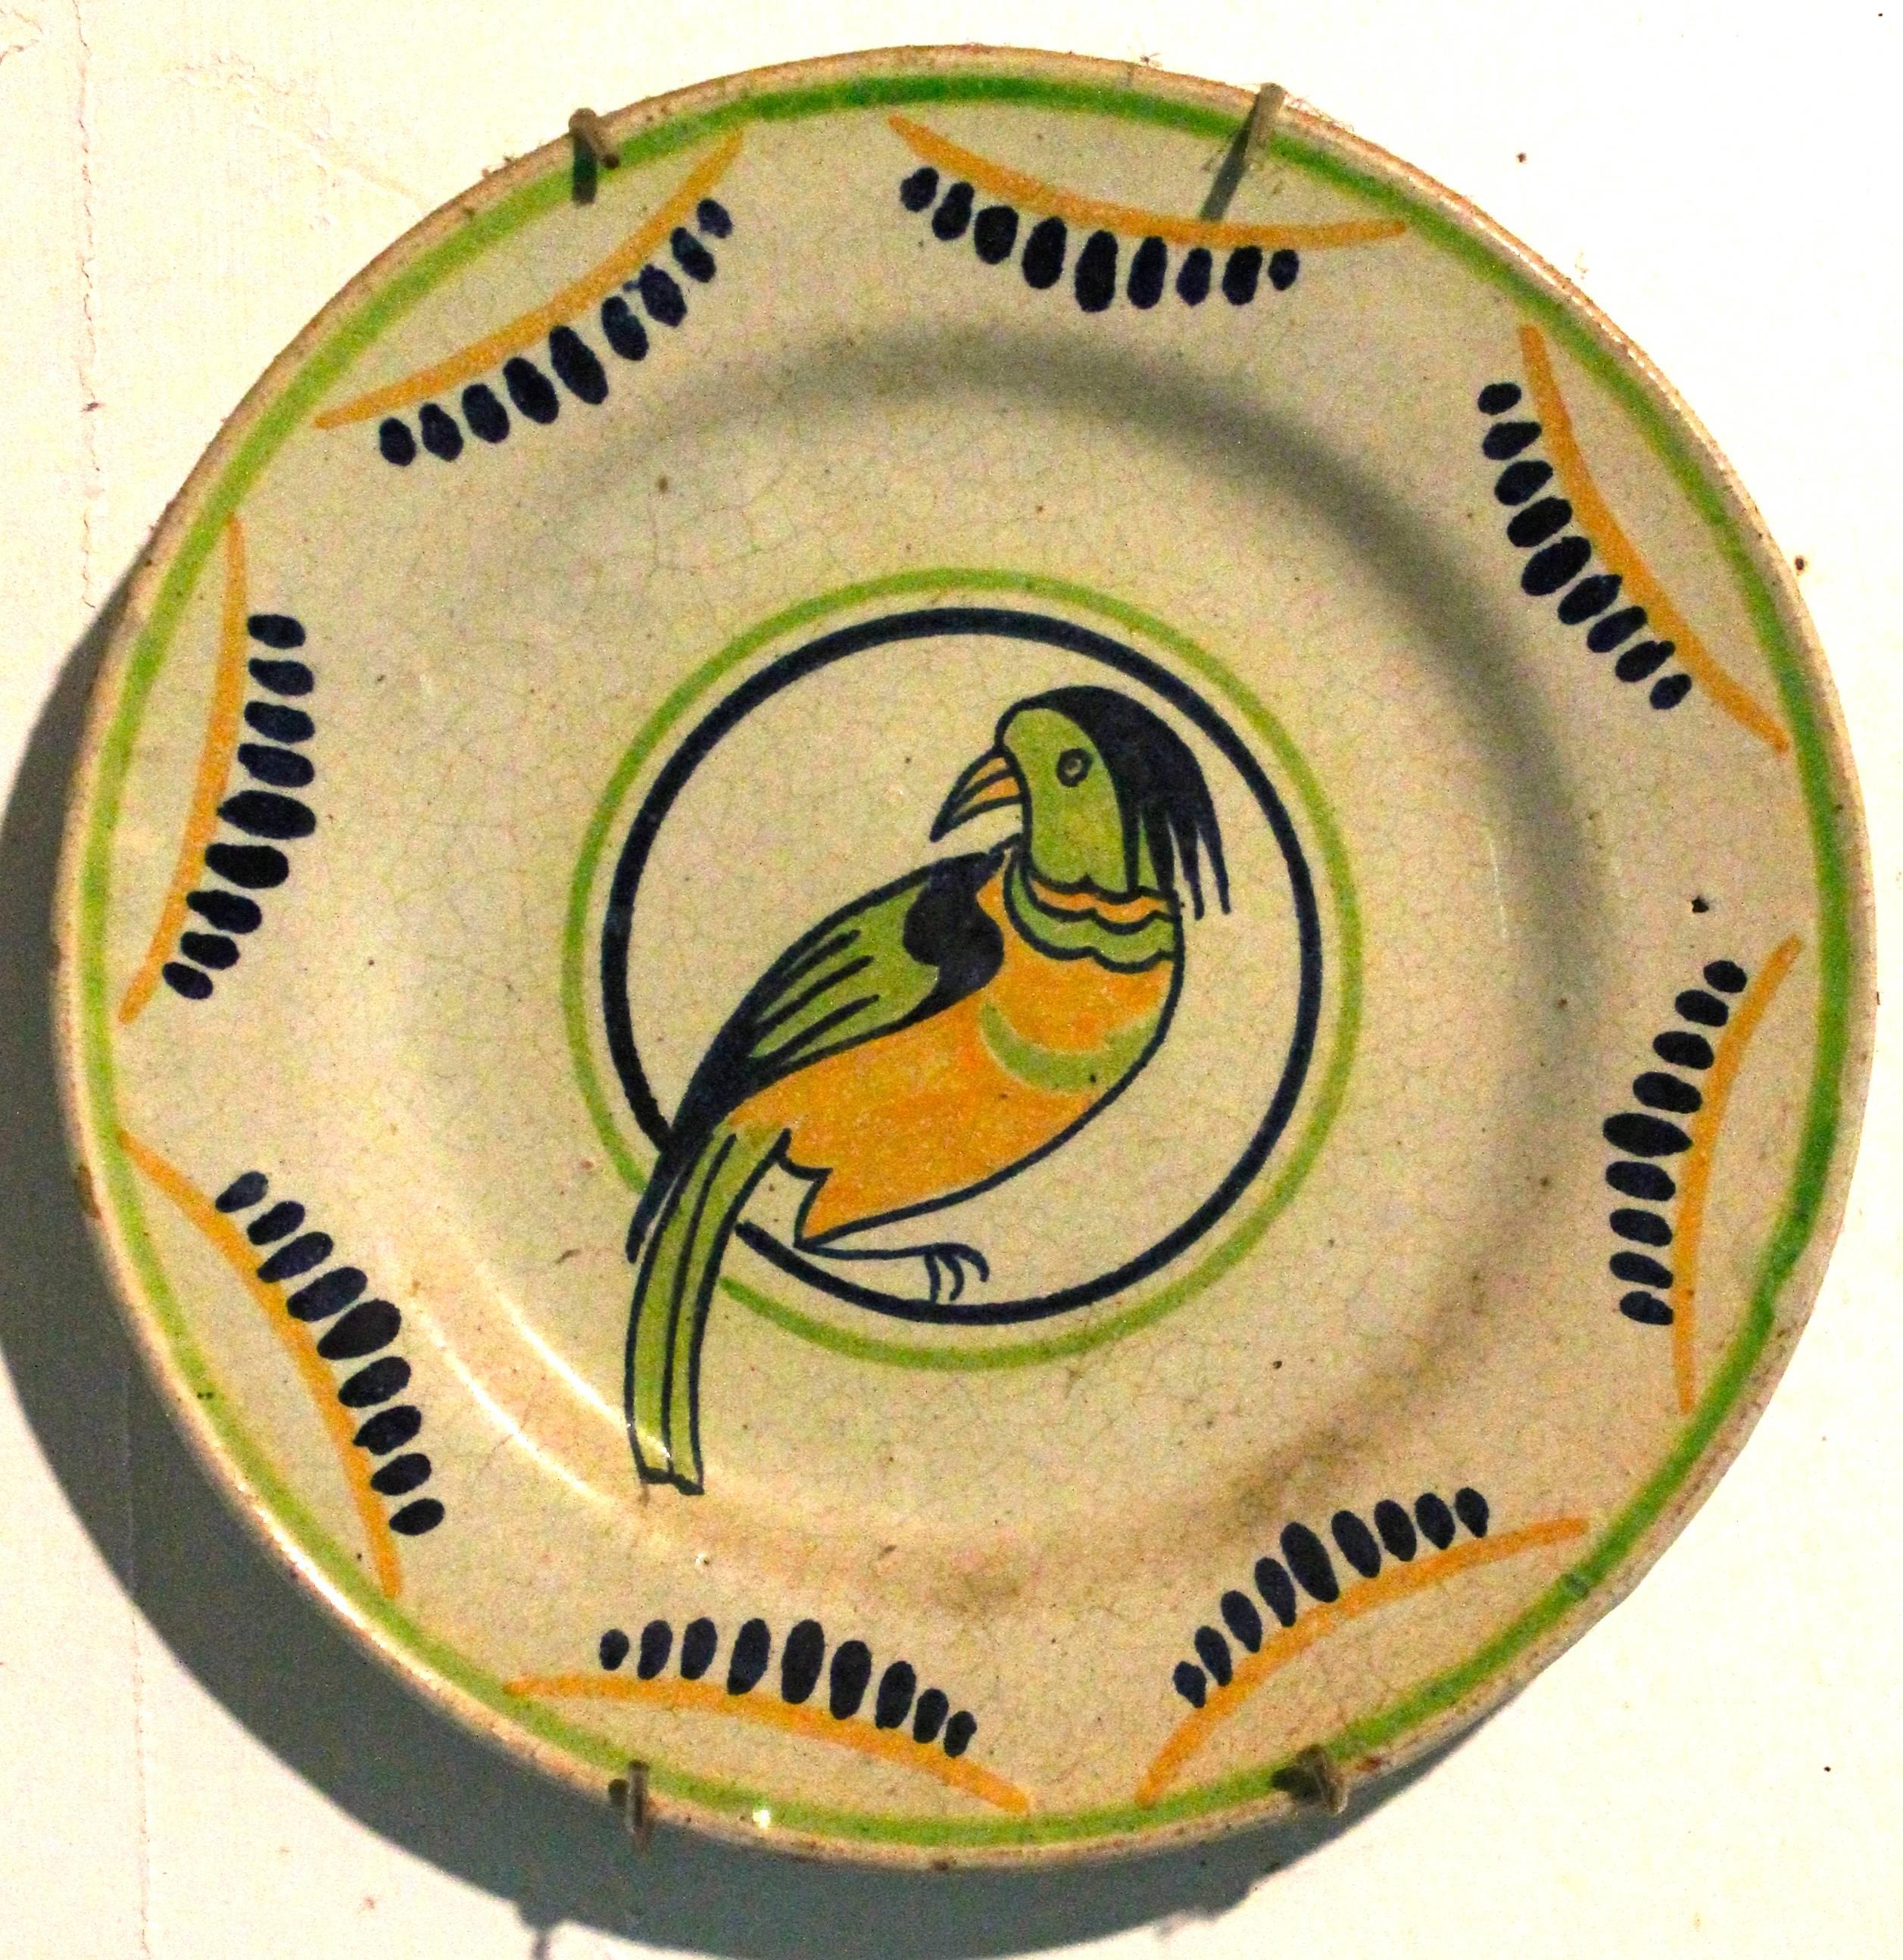 Ceramic Four Primavera French Art Deco Period Hand-Painted Plates with Bird Images